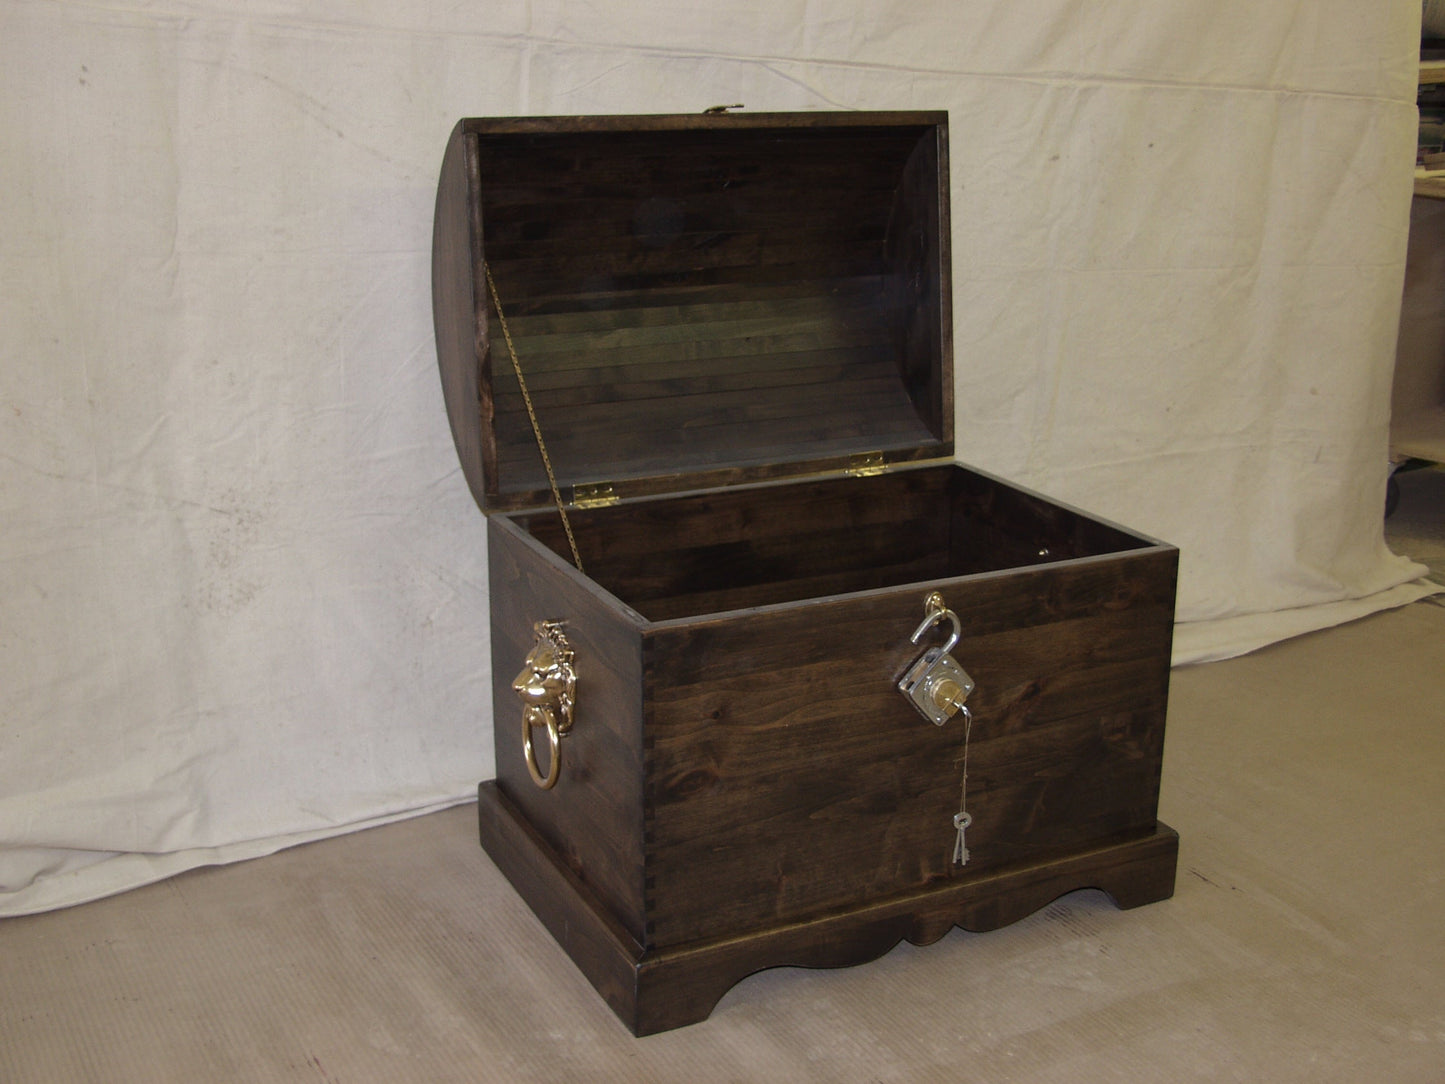 Round top Blanket chest, hope chest, treasure chest.